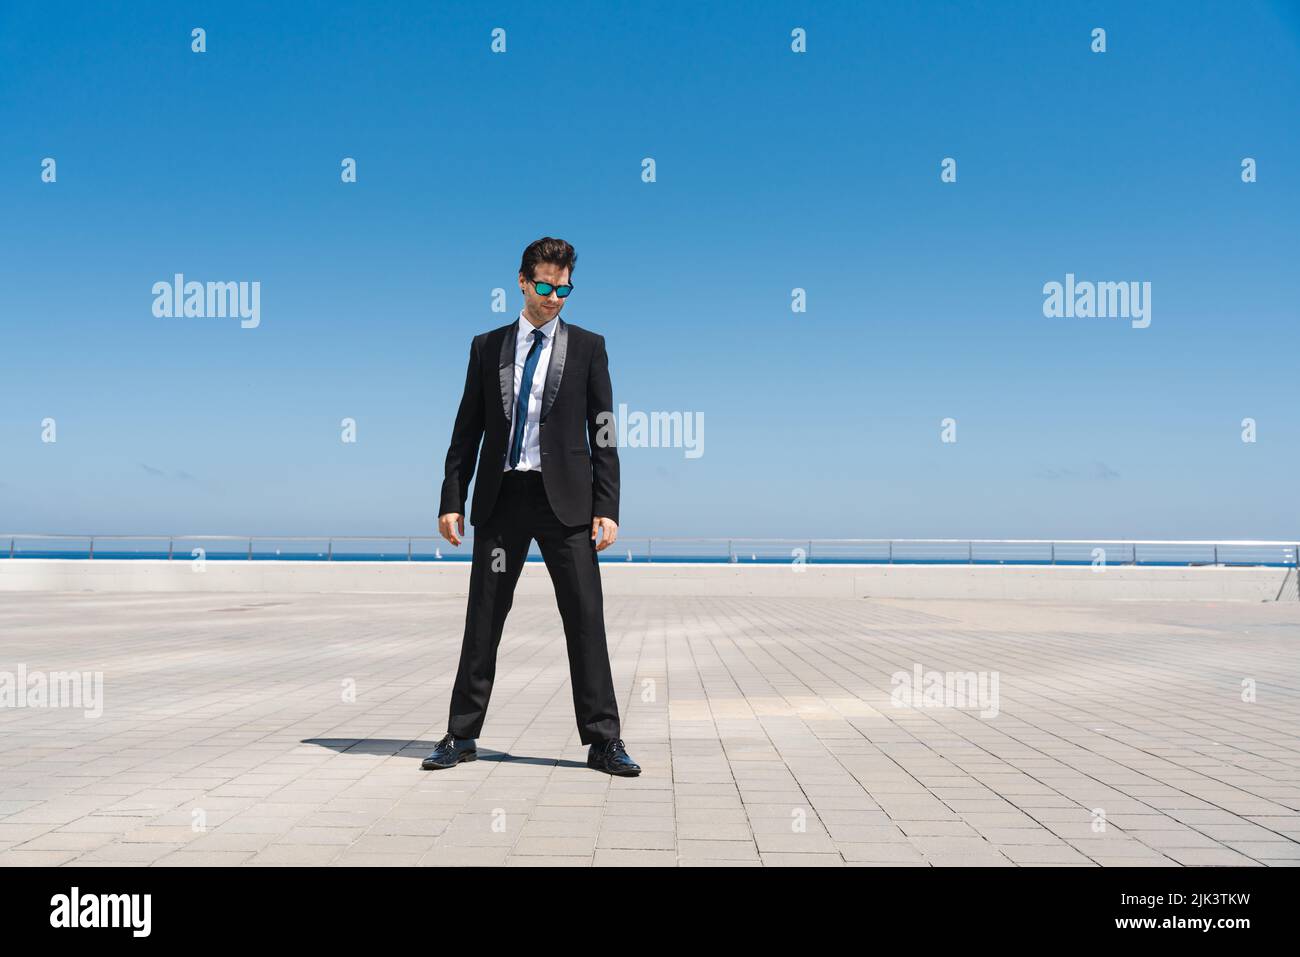 Happy and handsome adult businessman wearing elegant suit standing outdoors, full body portrait Stock Photo